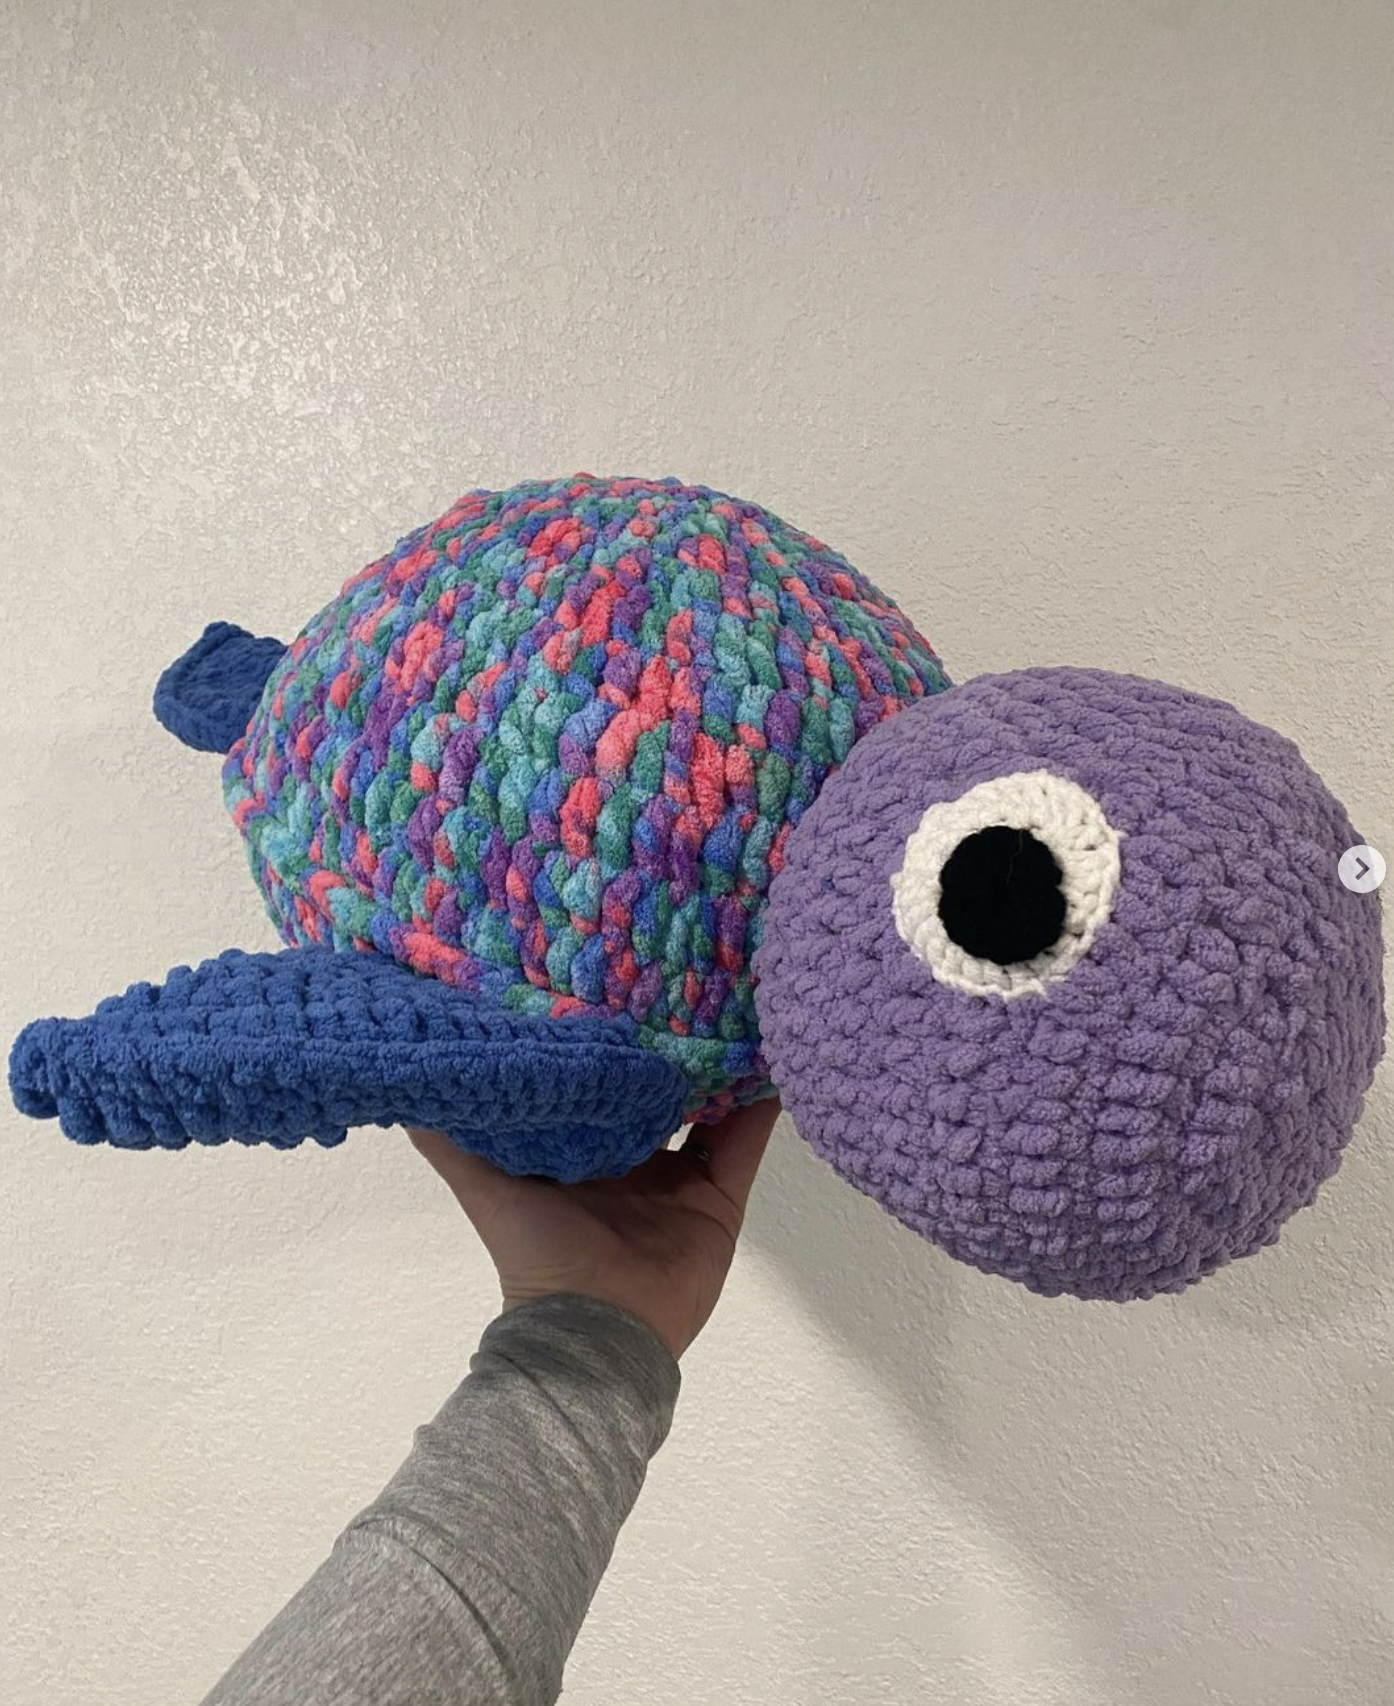 Poly-Fil Earth Day projects turtle plush DIY